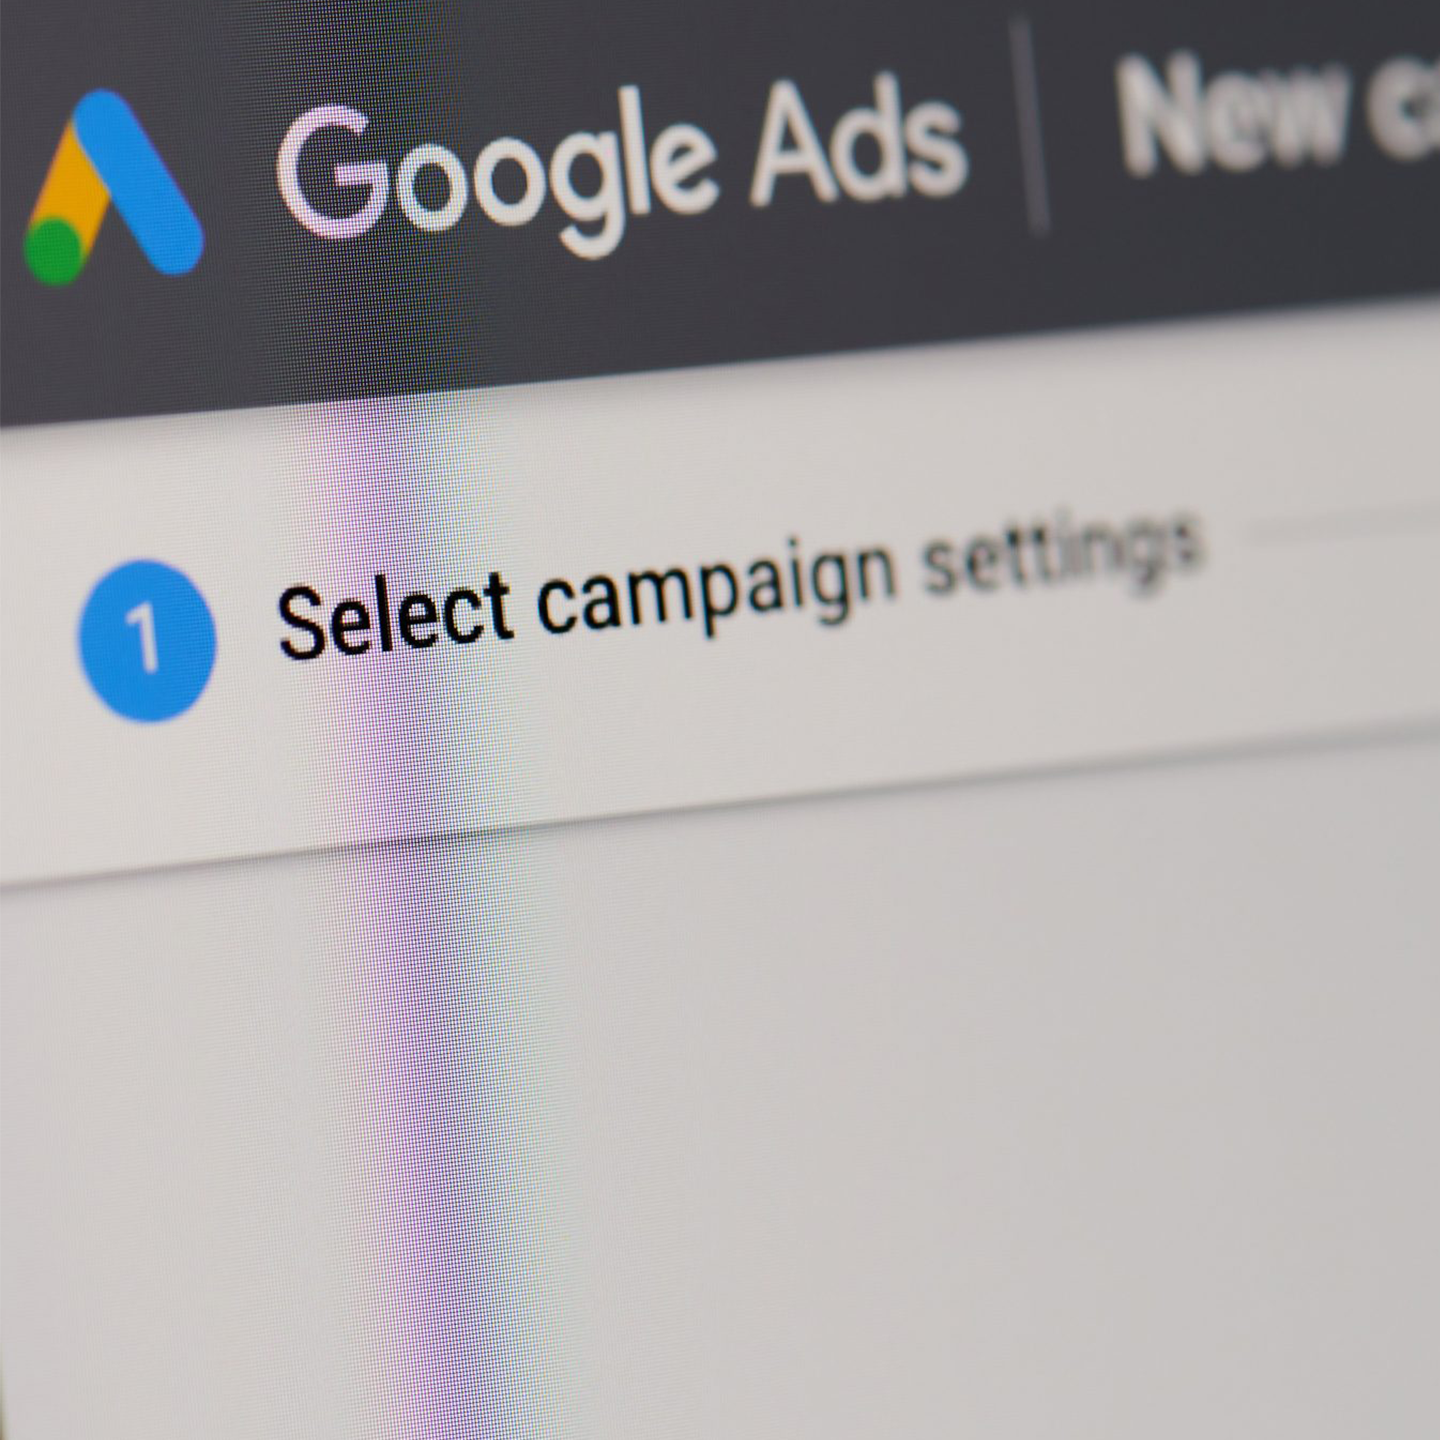 Recruiters can take advantage of PPC advertising to reach the right candidates more efficiently and effectively.